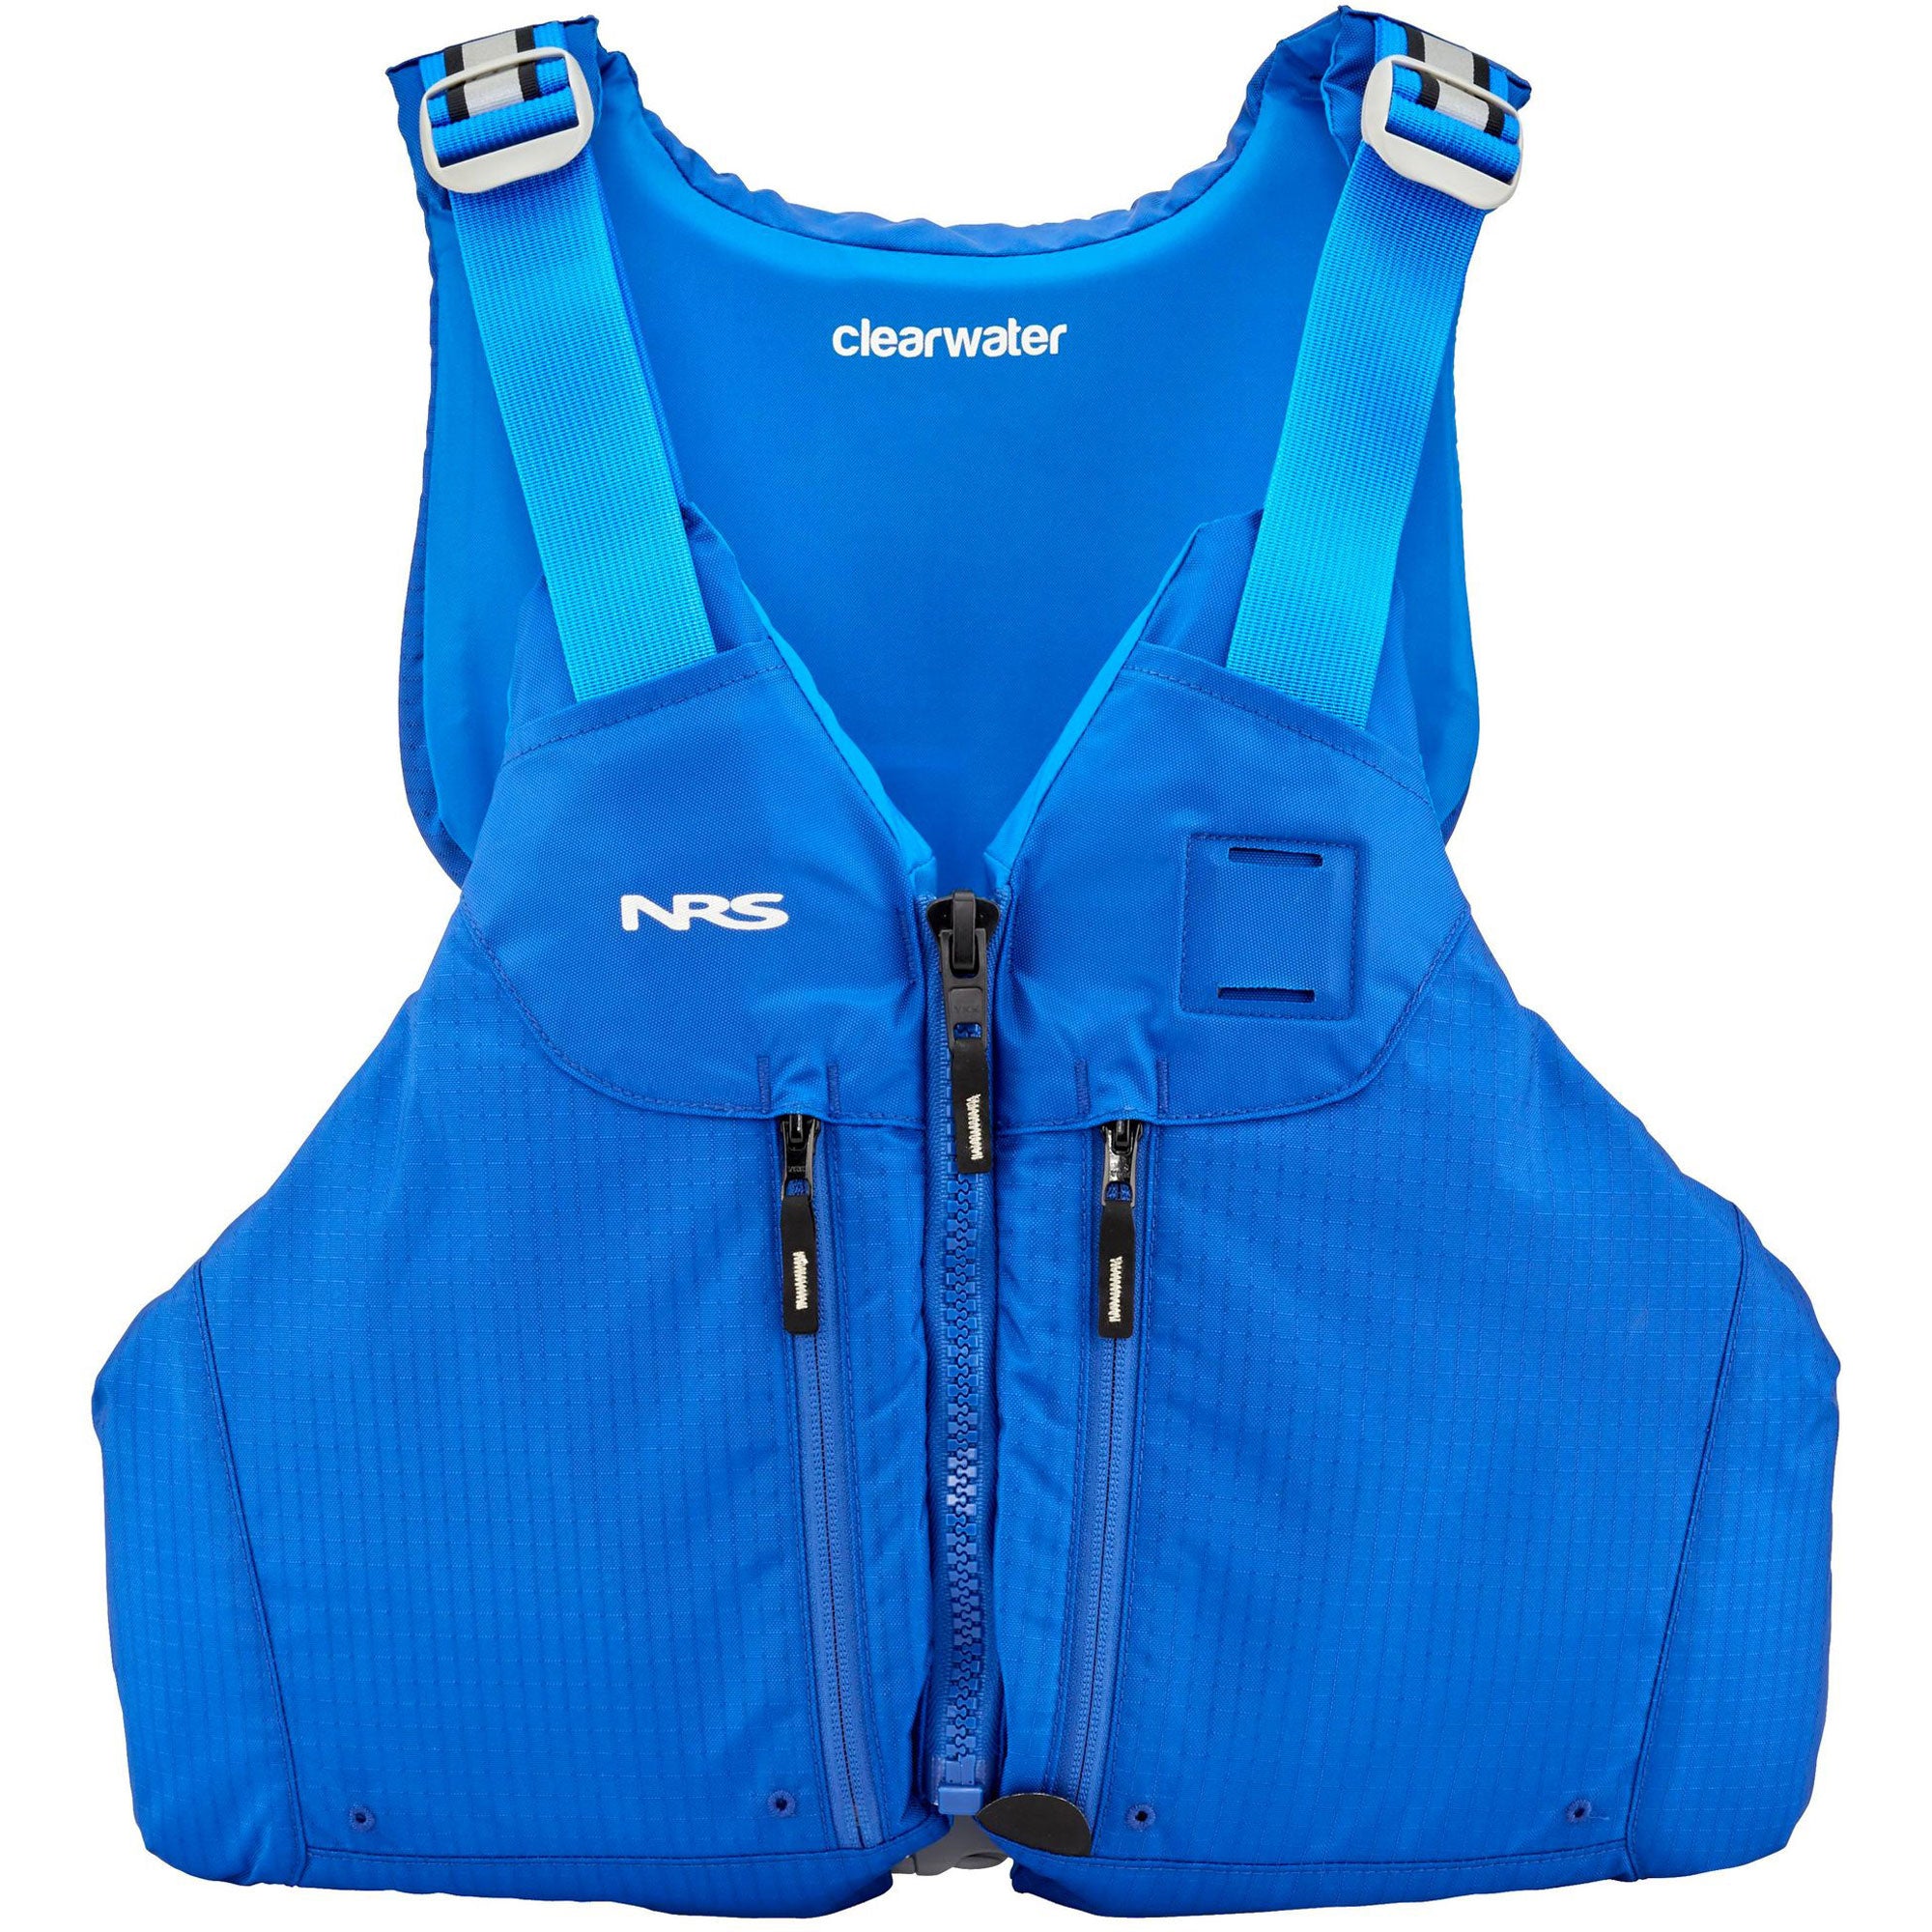 NRS Clearwater Mesh Back PFD - Blue